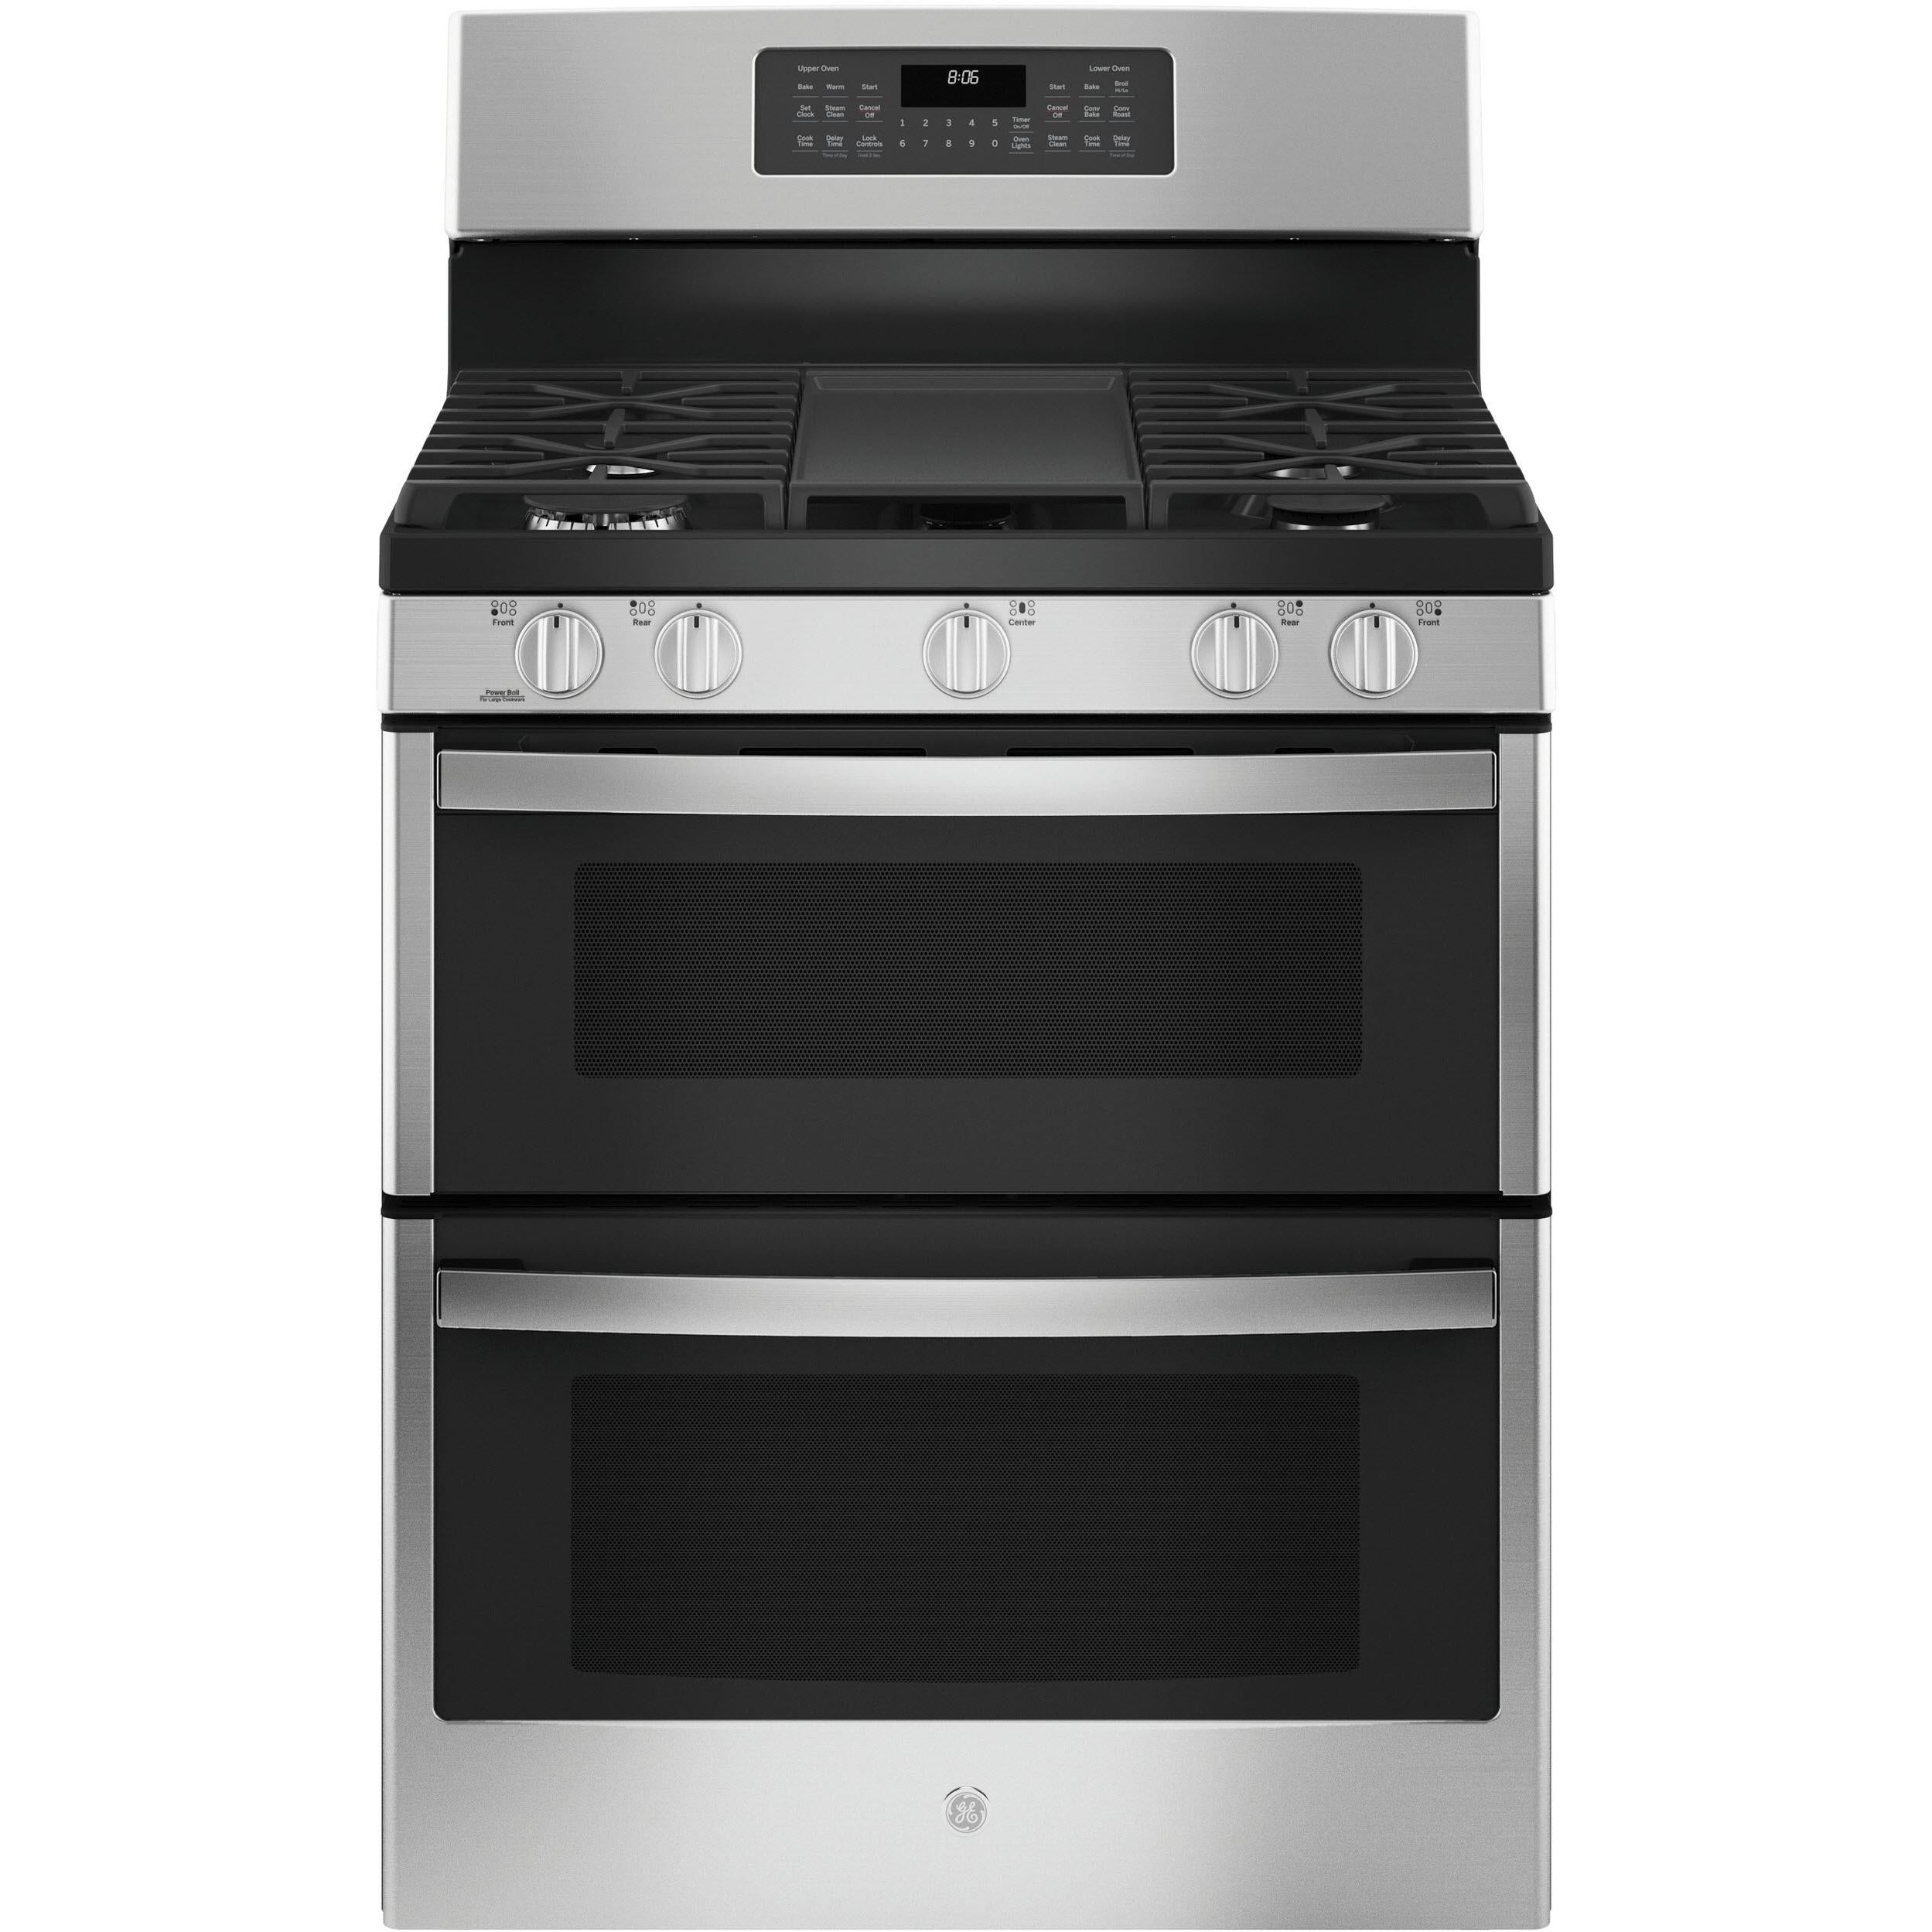 GE 30-inch Freestanding Gas Range with Convection Technology JGBS86SPSS